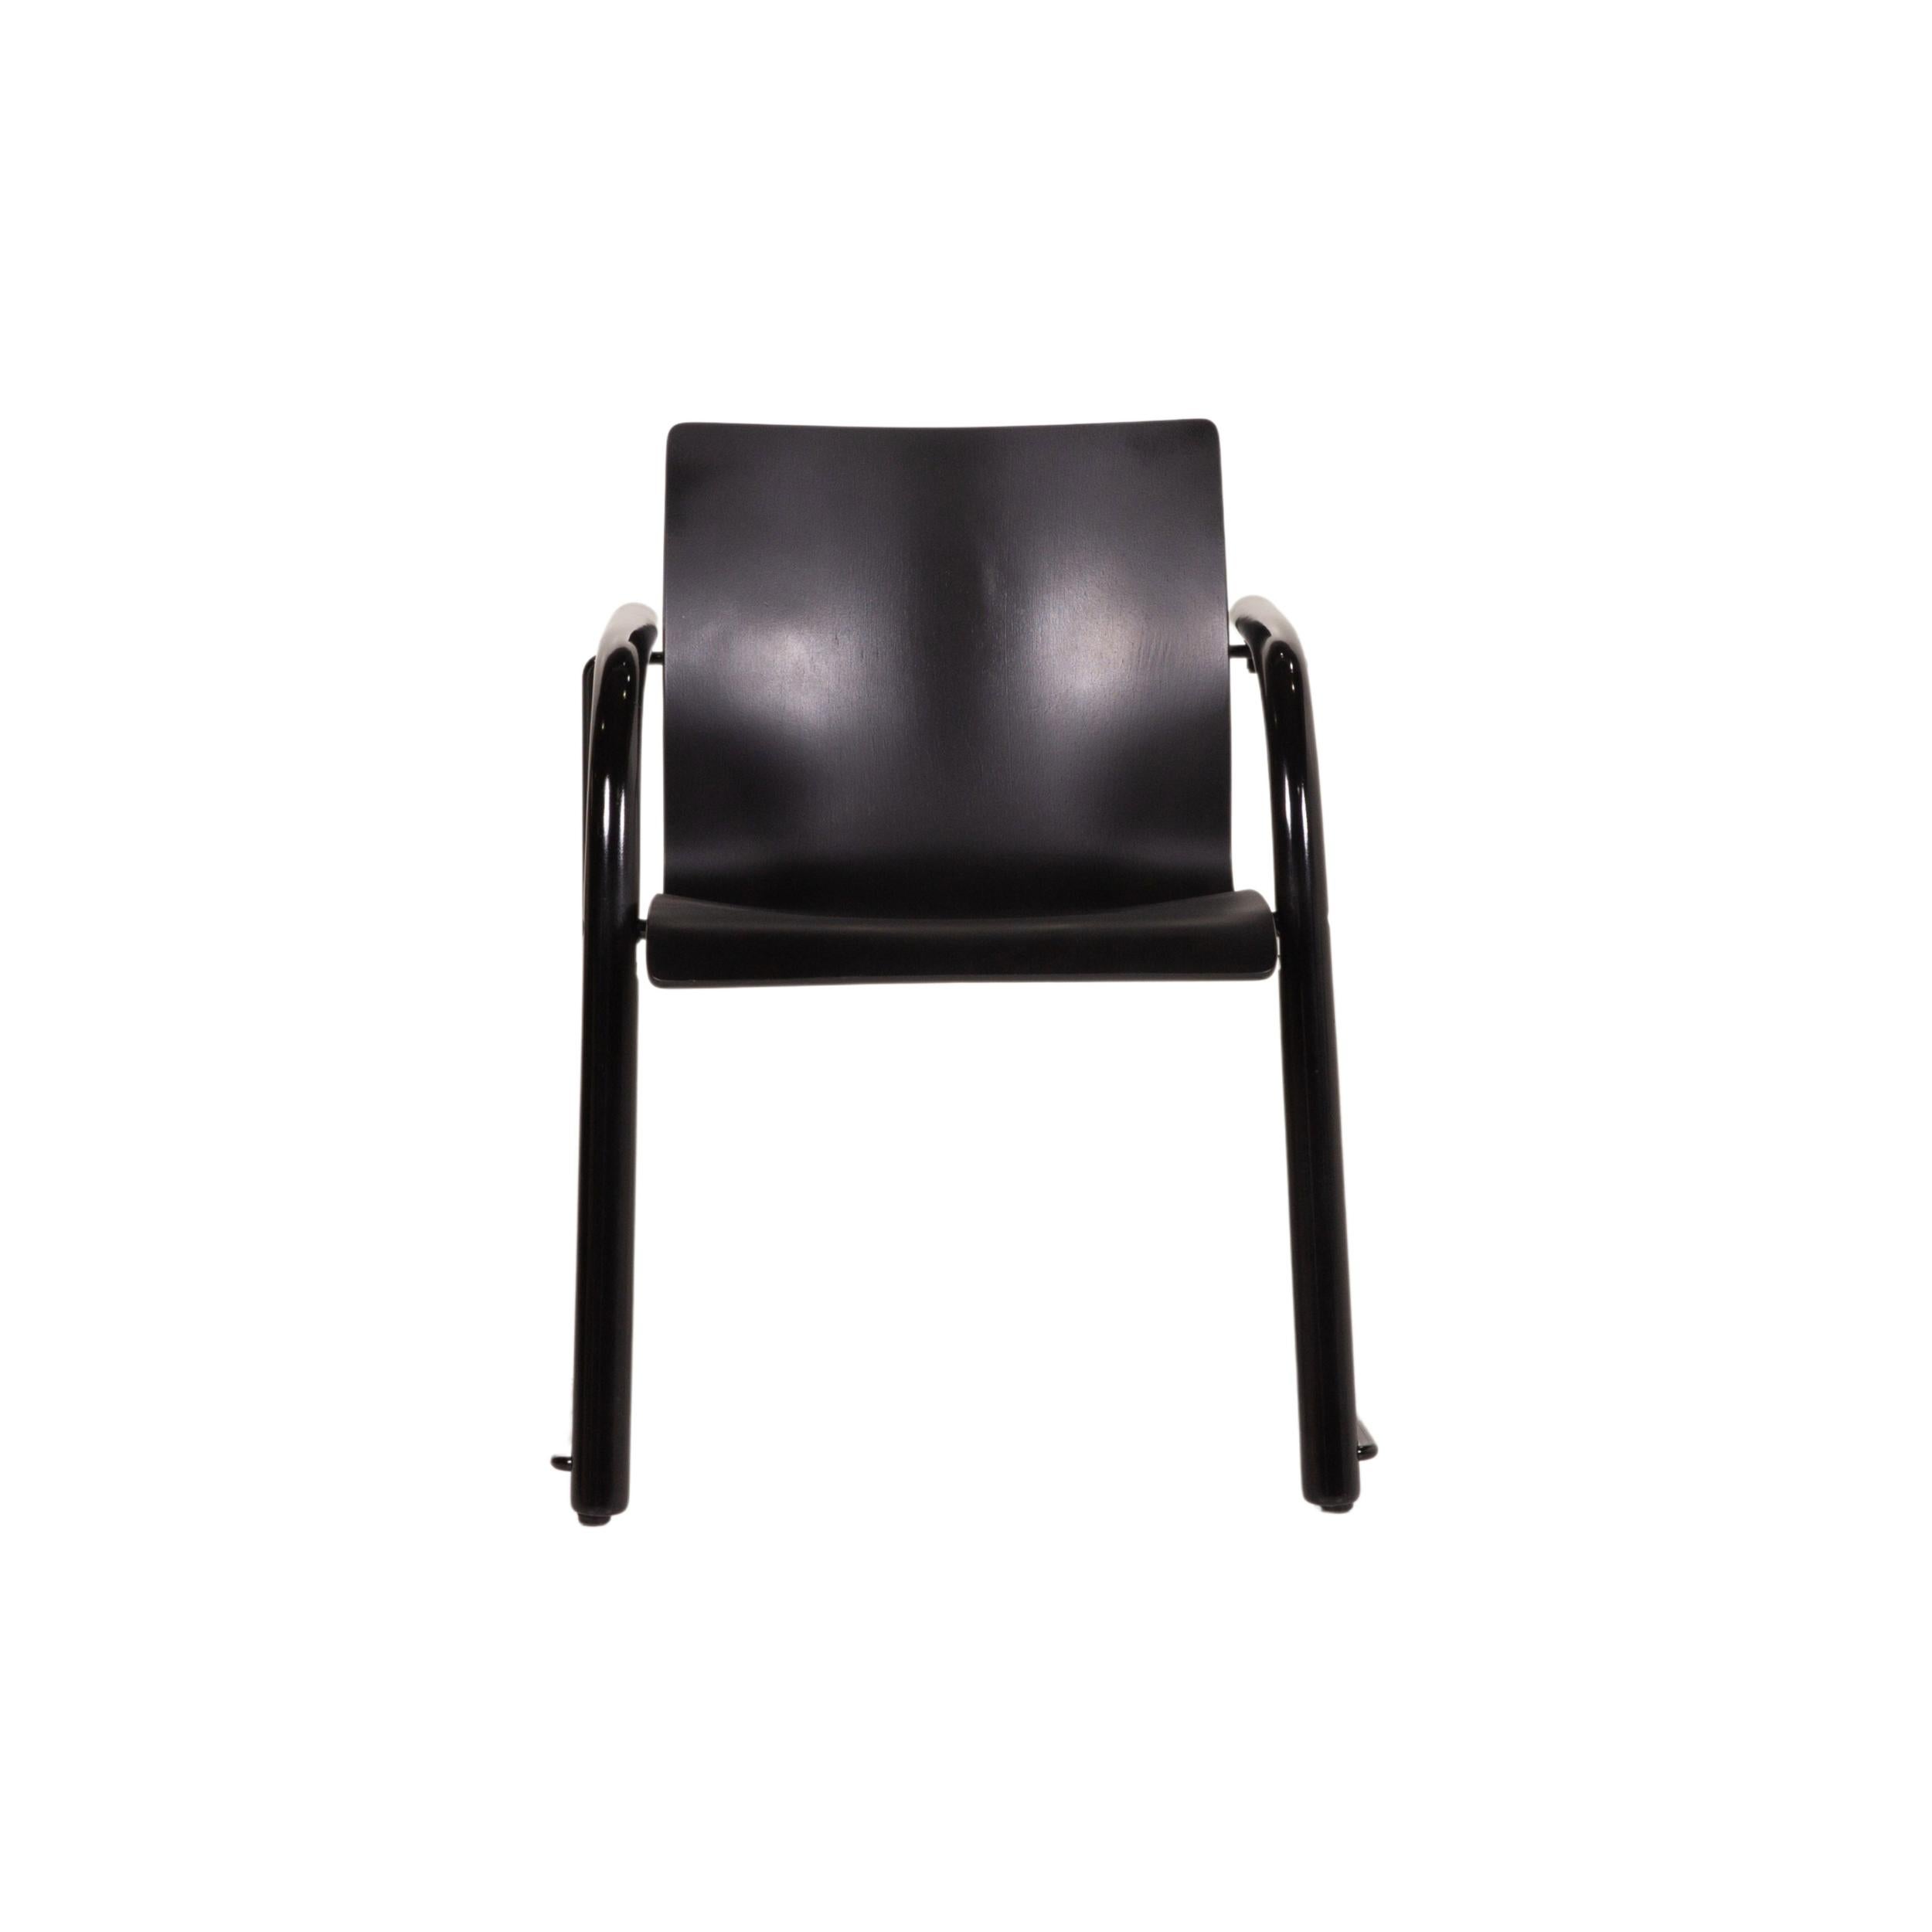 Thonet S320 Wood Chair Black In Good Condition For Sale In Cologne, DE